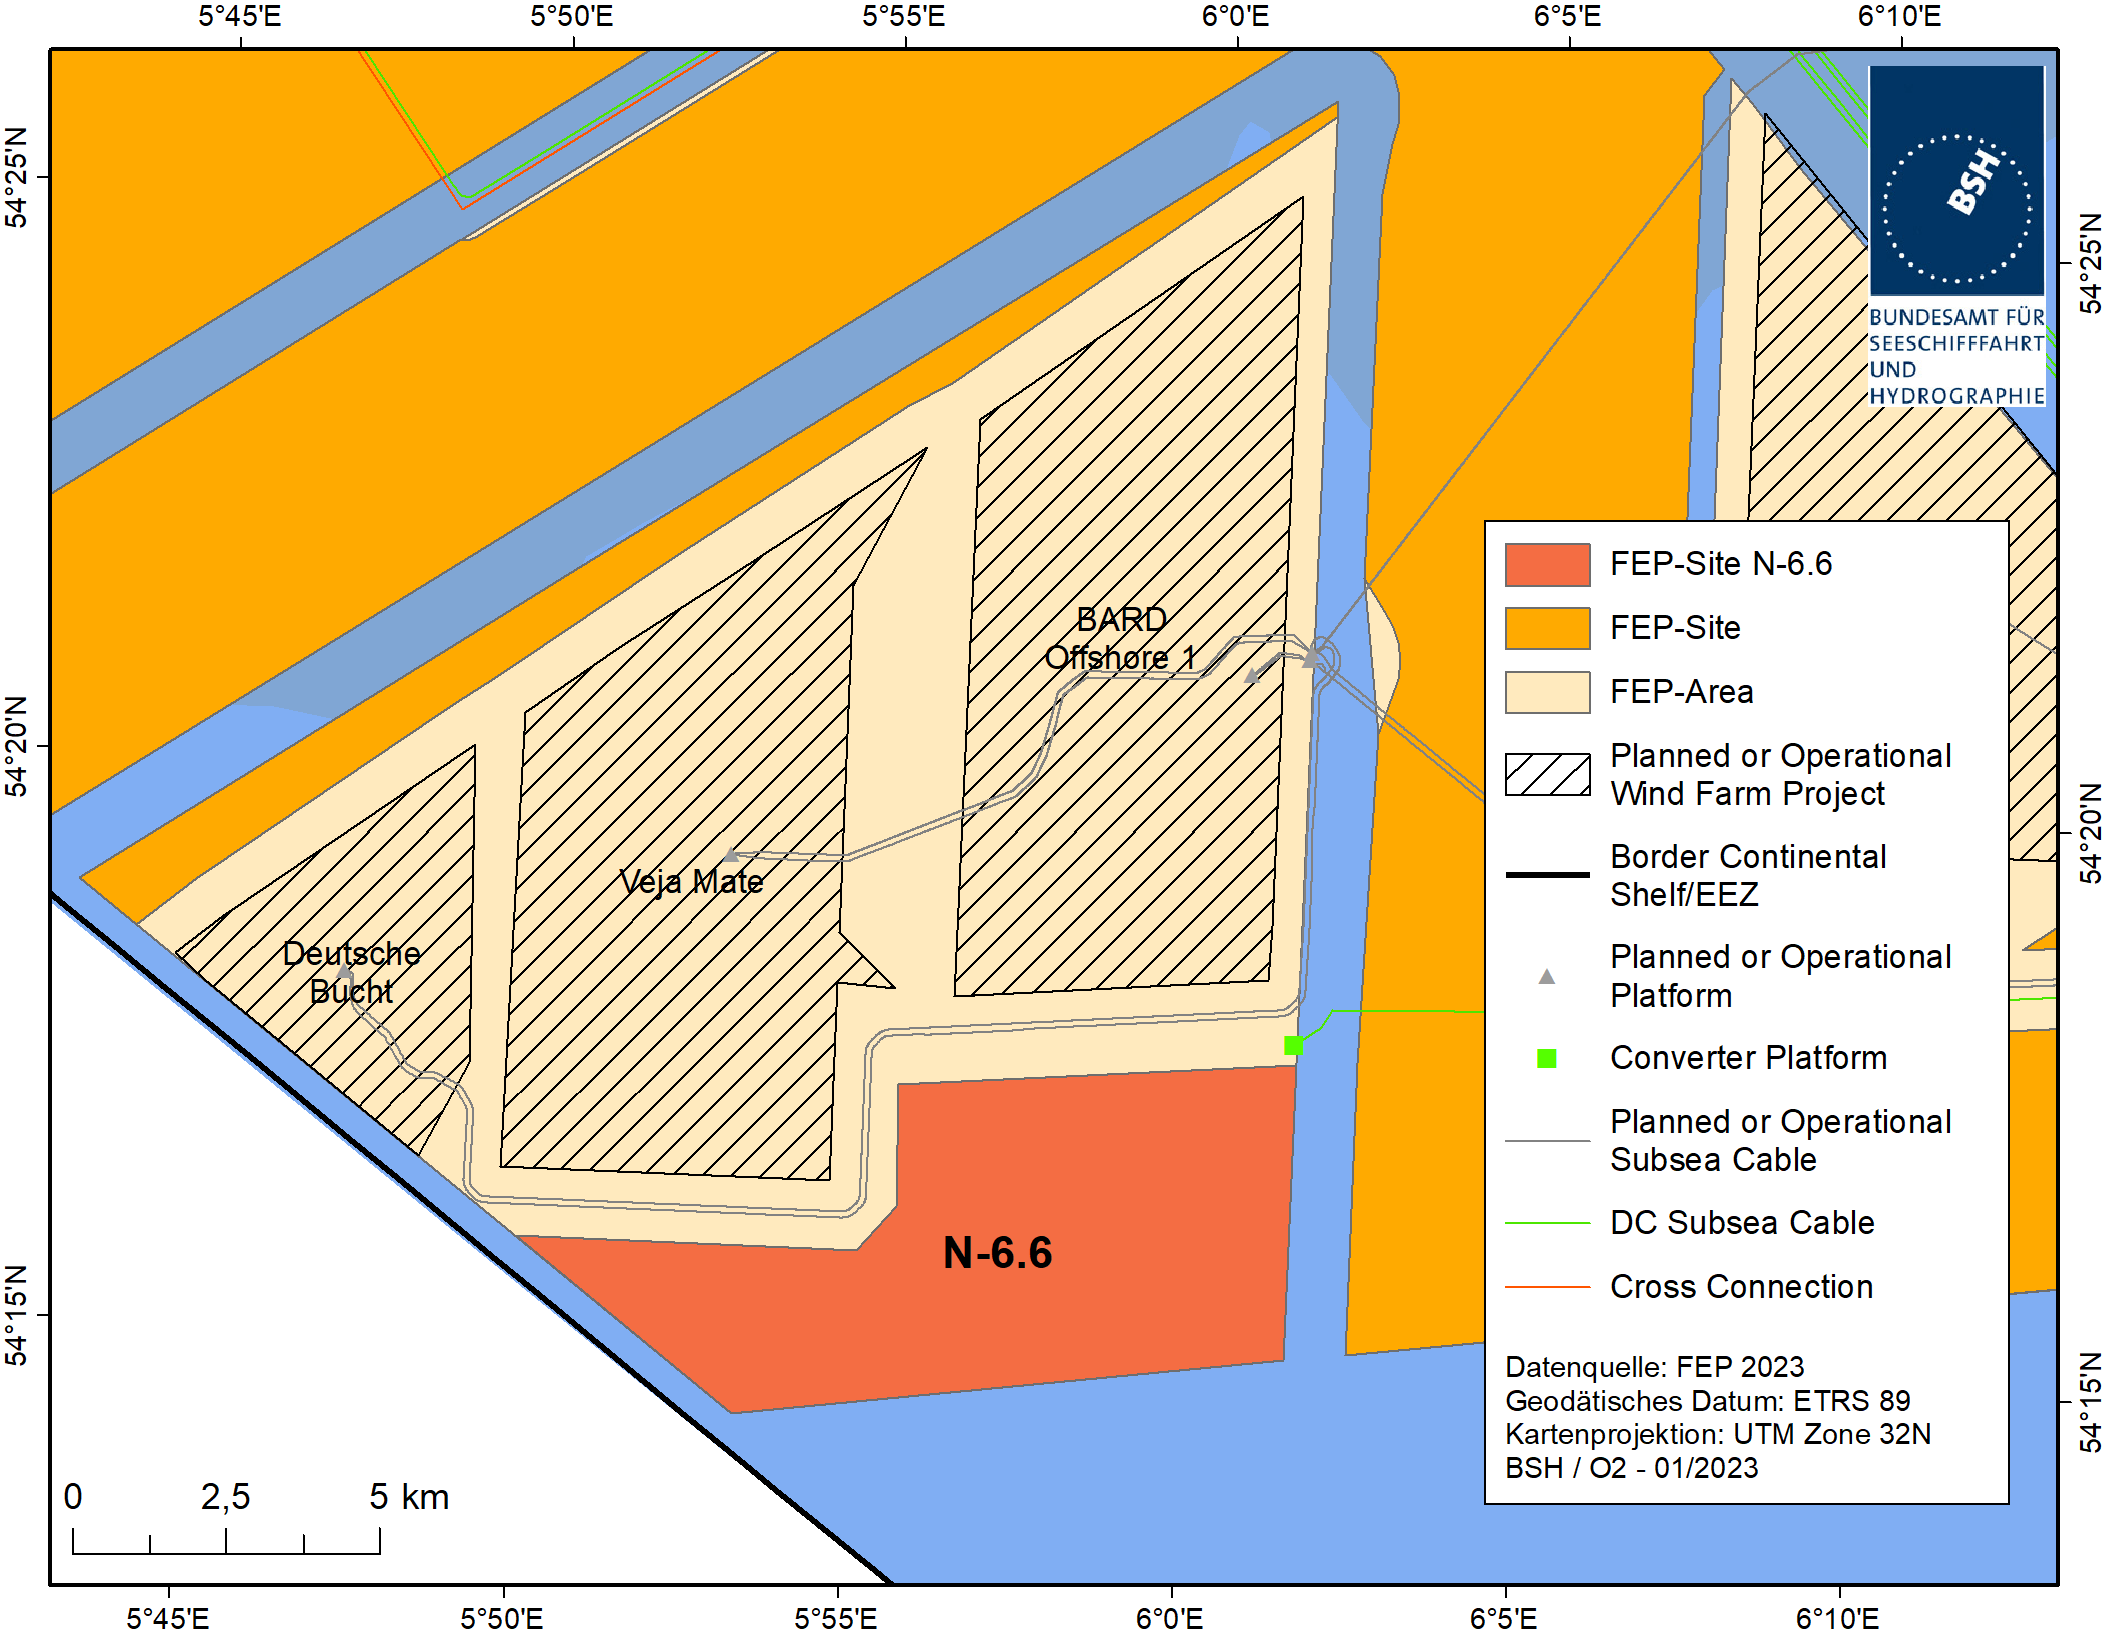 Map of Site N-6.6